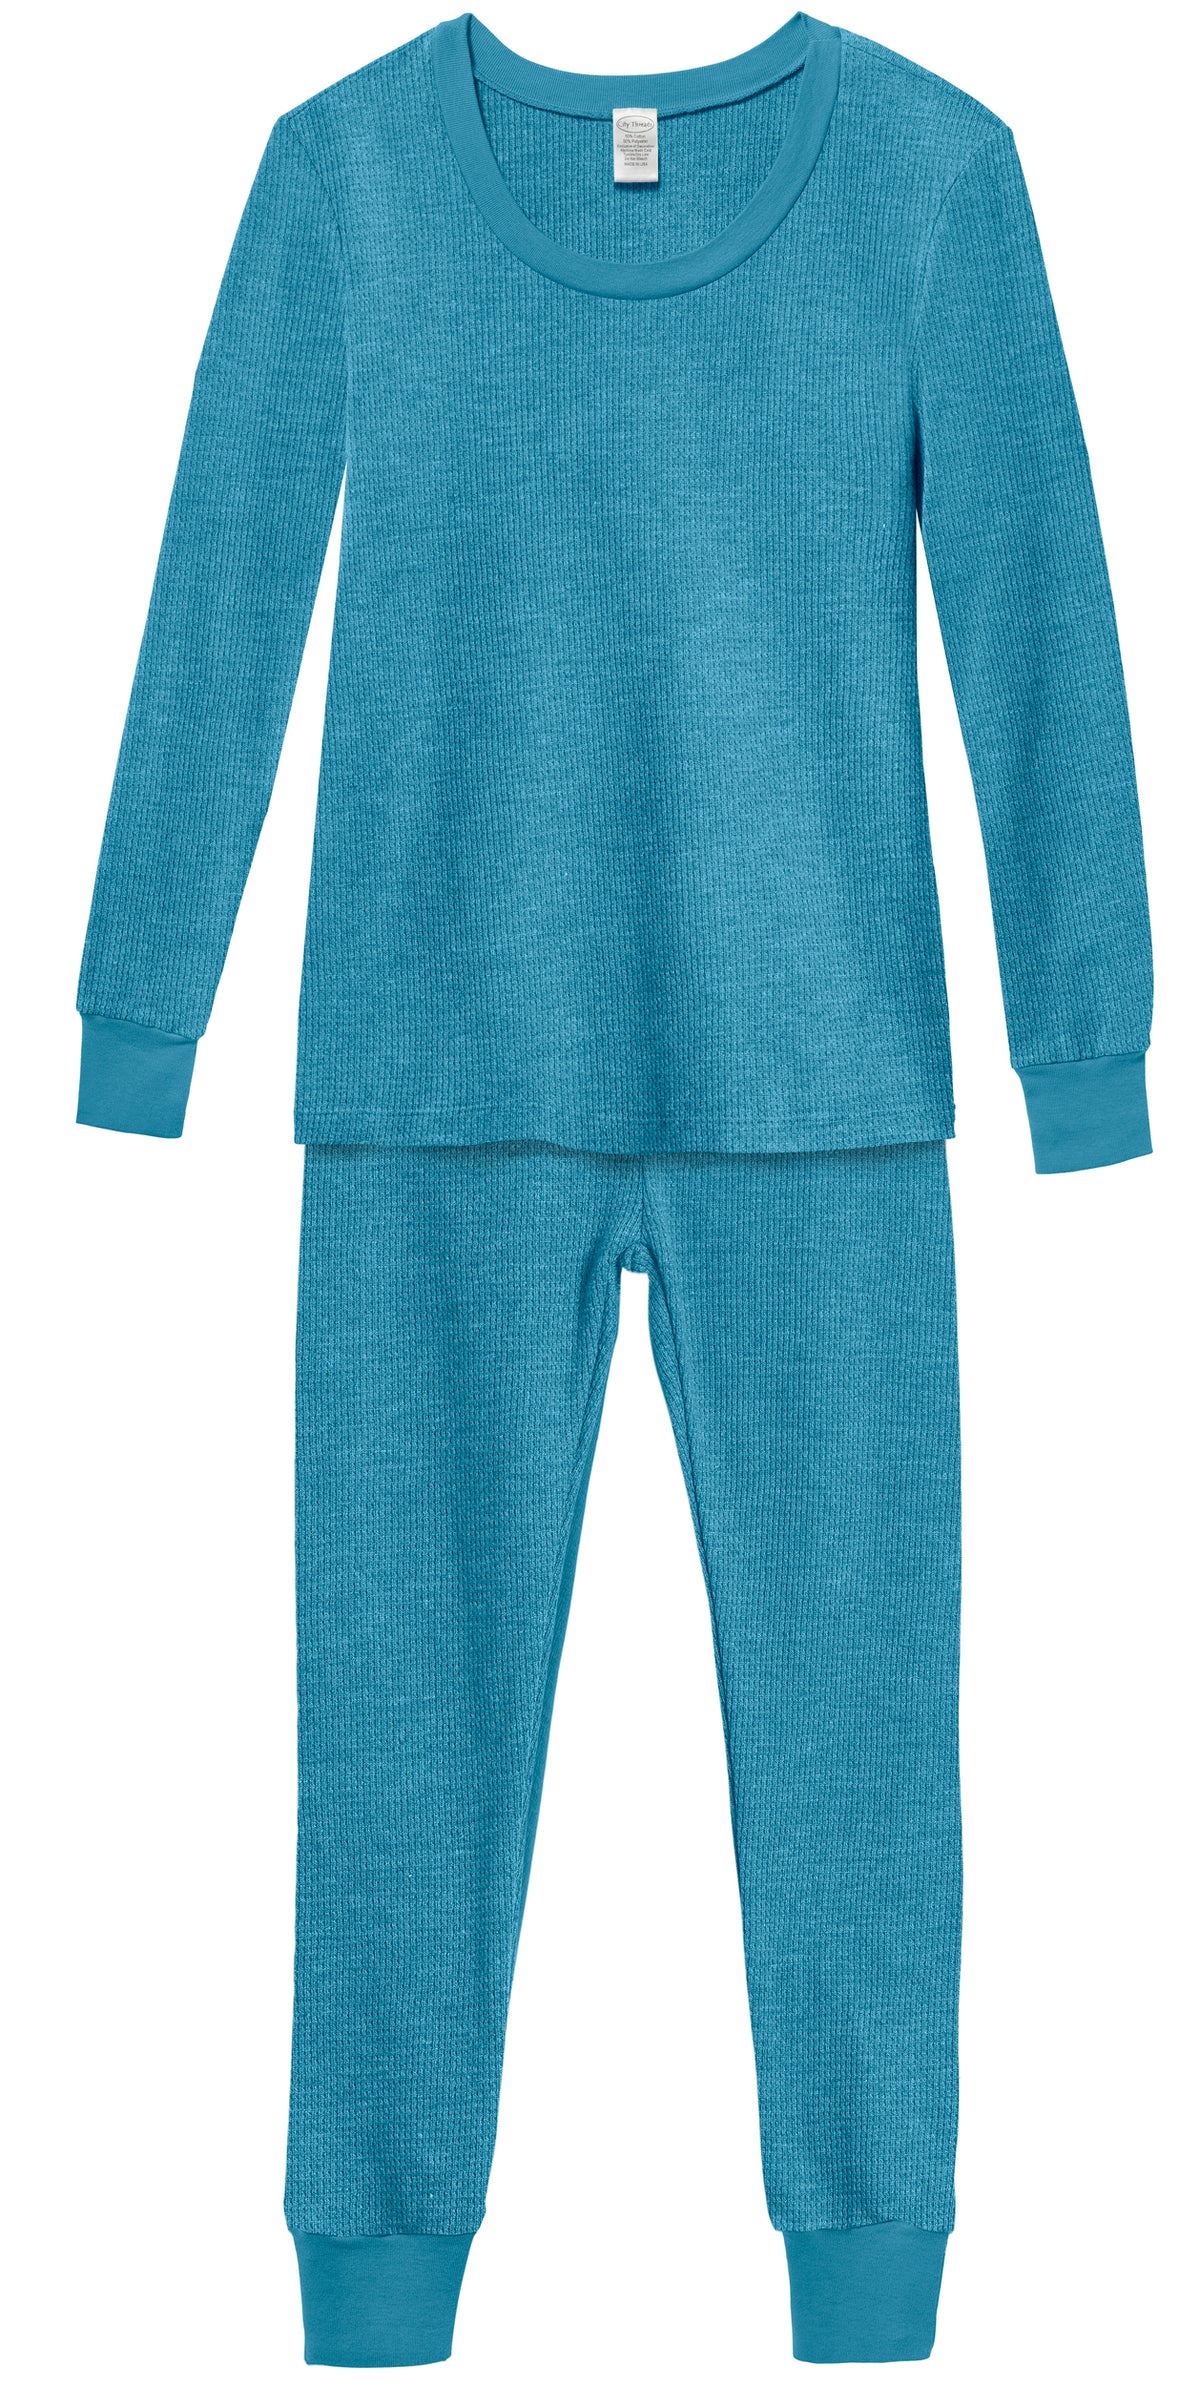 Women's Thermal 2-Piece Long Johns - City Threads USA